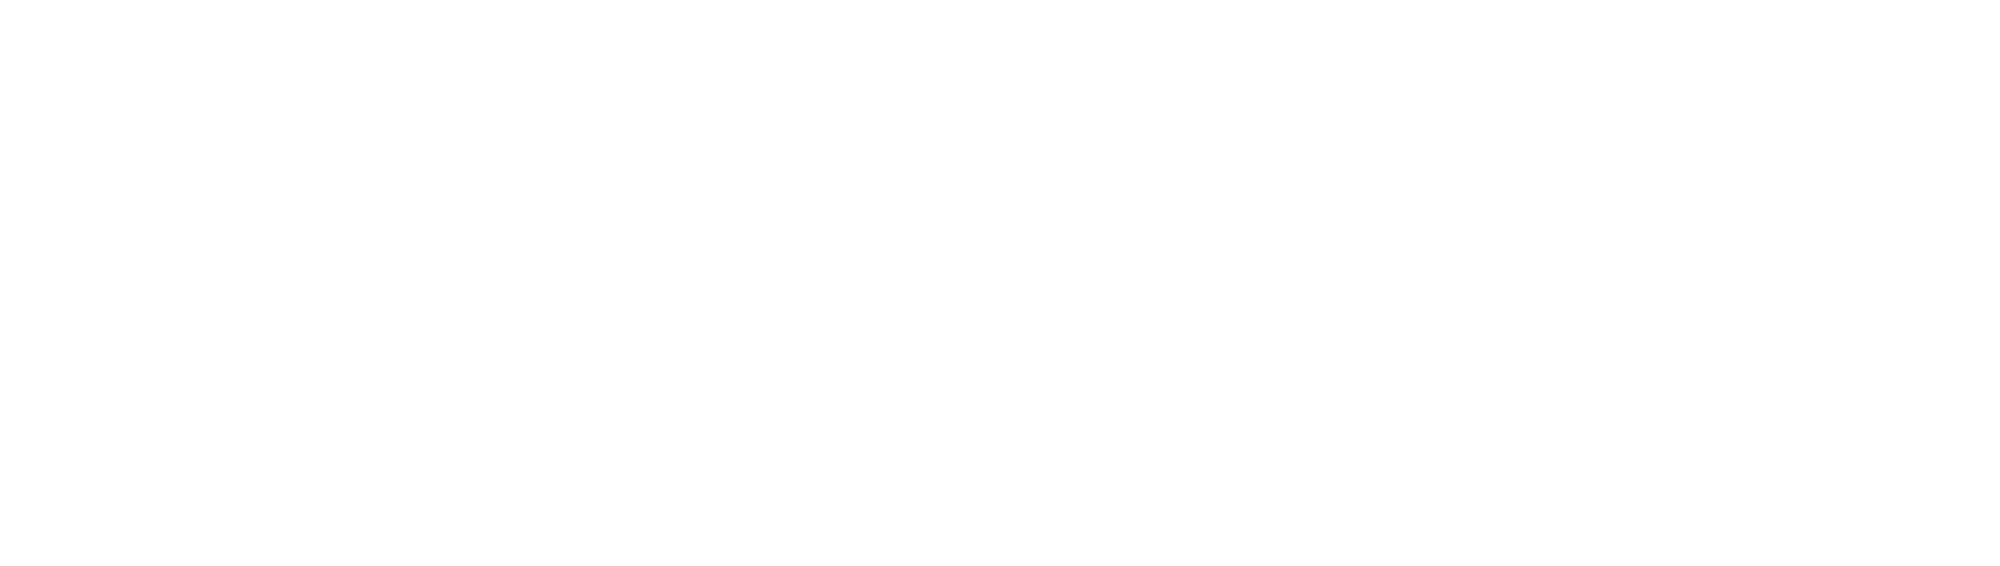 Ixxat by HMS Networks